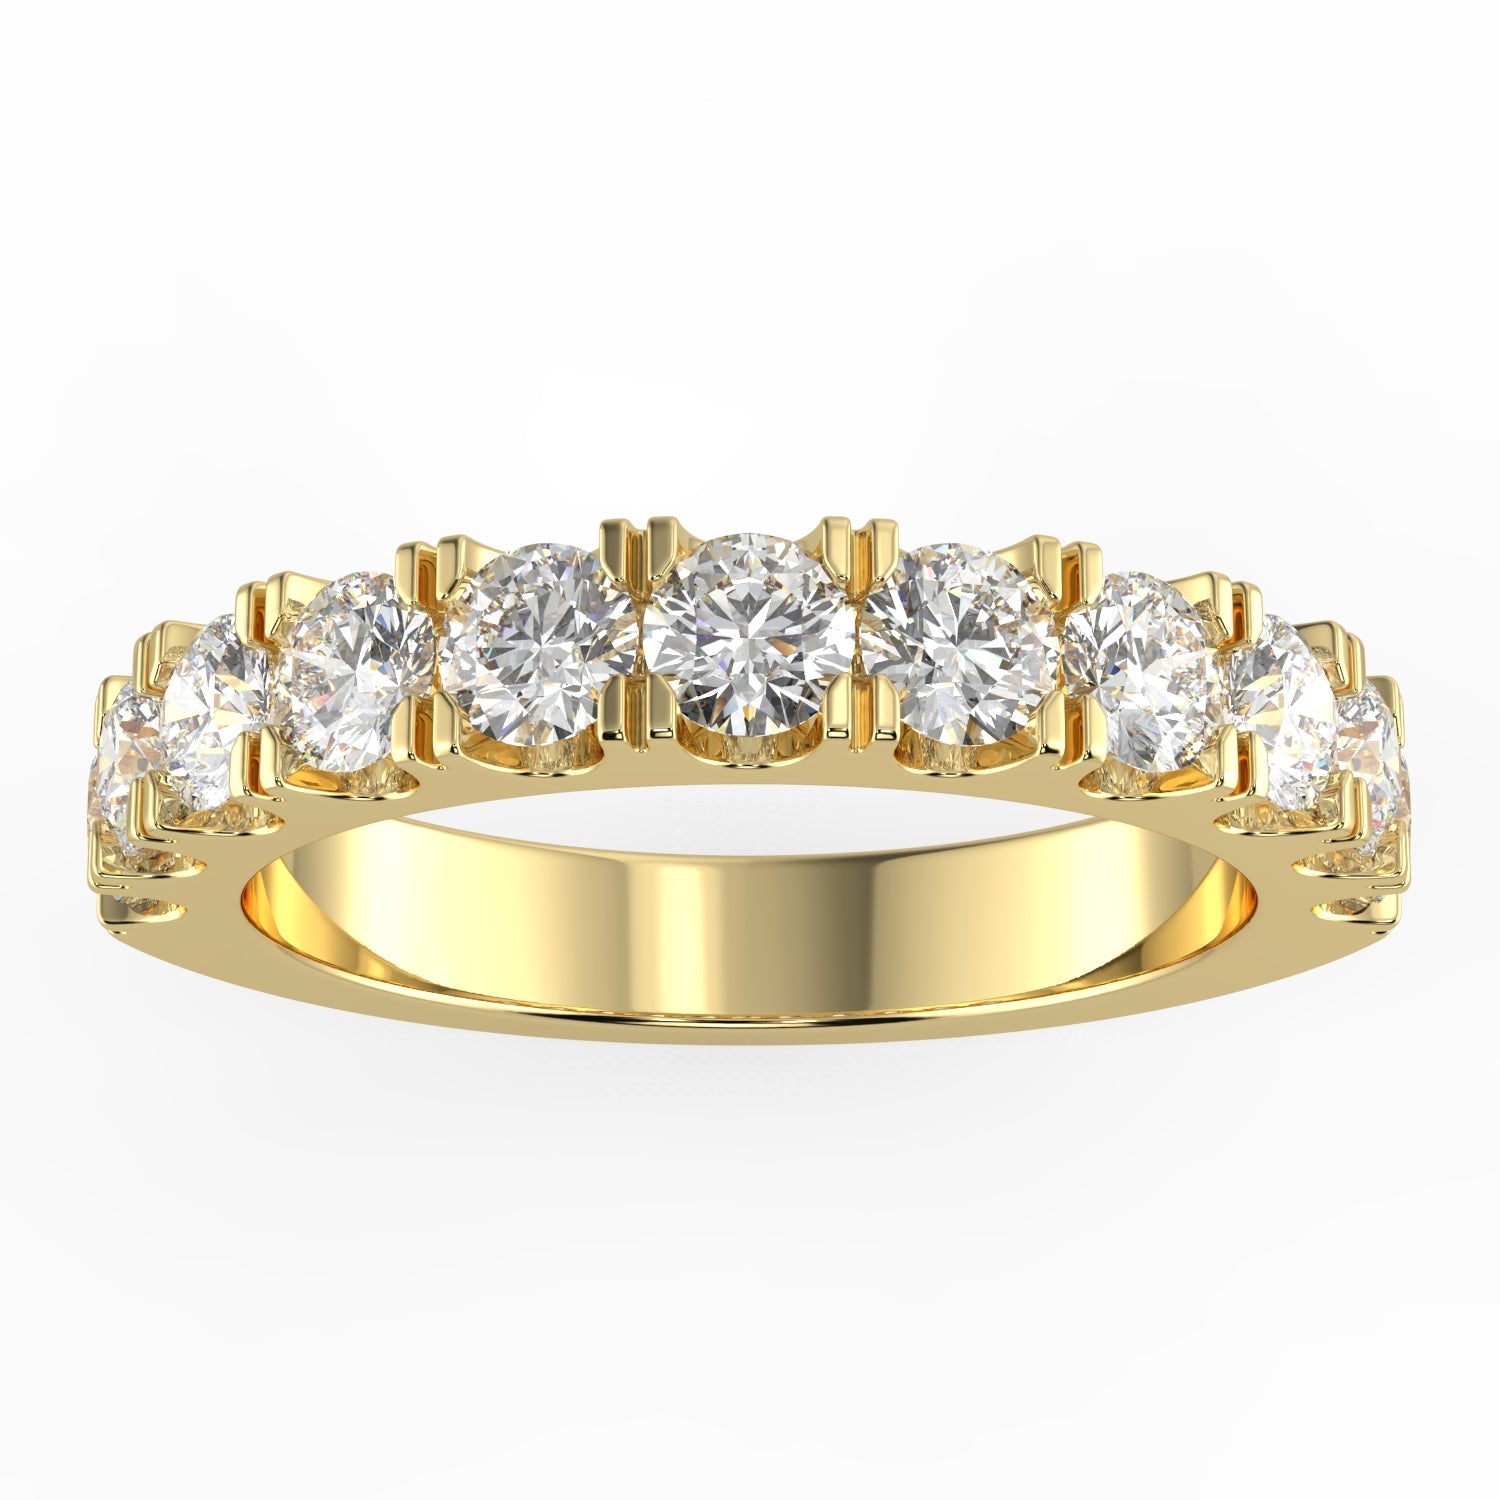 0.25CTW 11 ROUND STONE PRONG SET NATURAL DIAMOND GH/SI HALF ETERNITY WEDDING /ANNIVERSARY BAND SET IN 14K GOLD